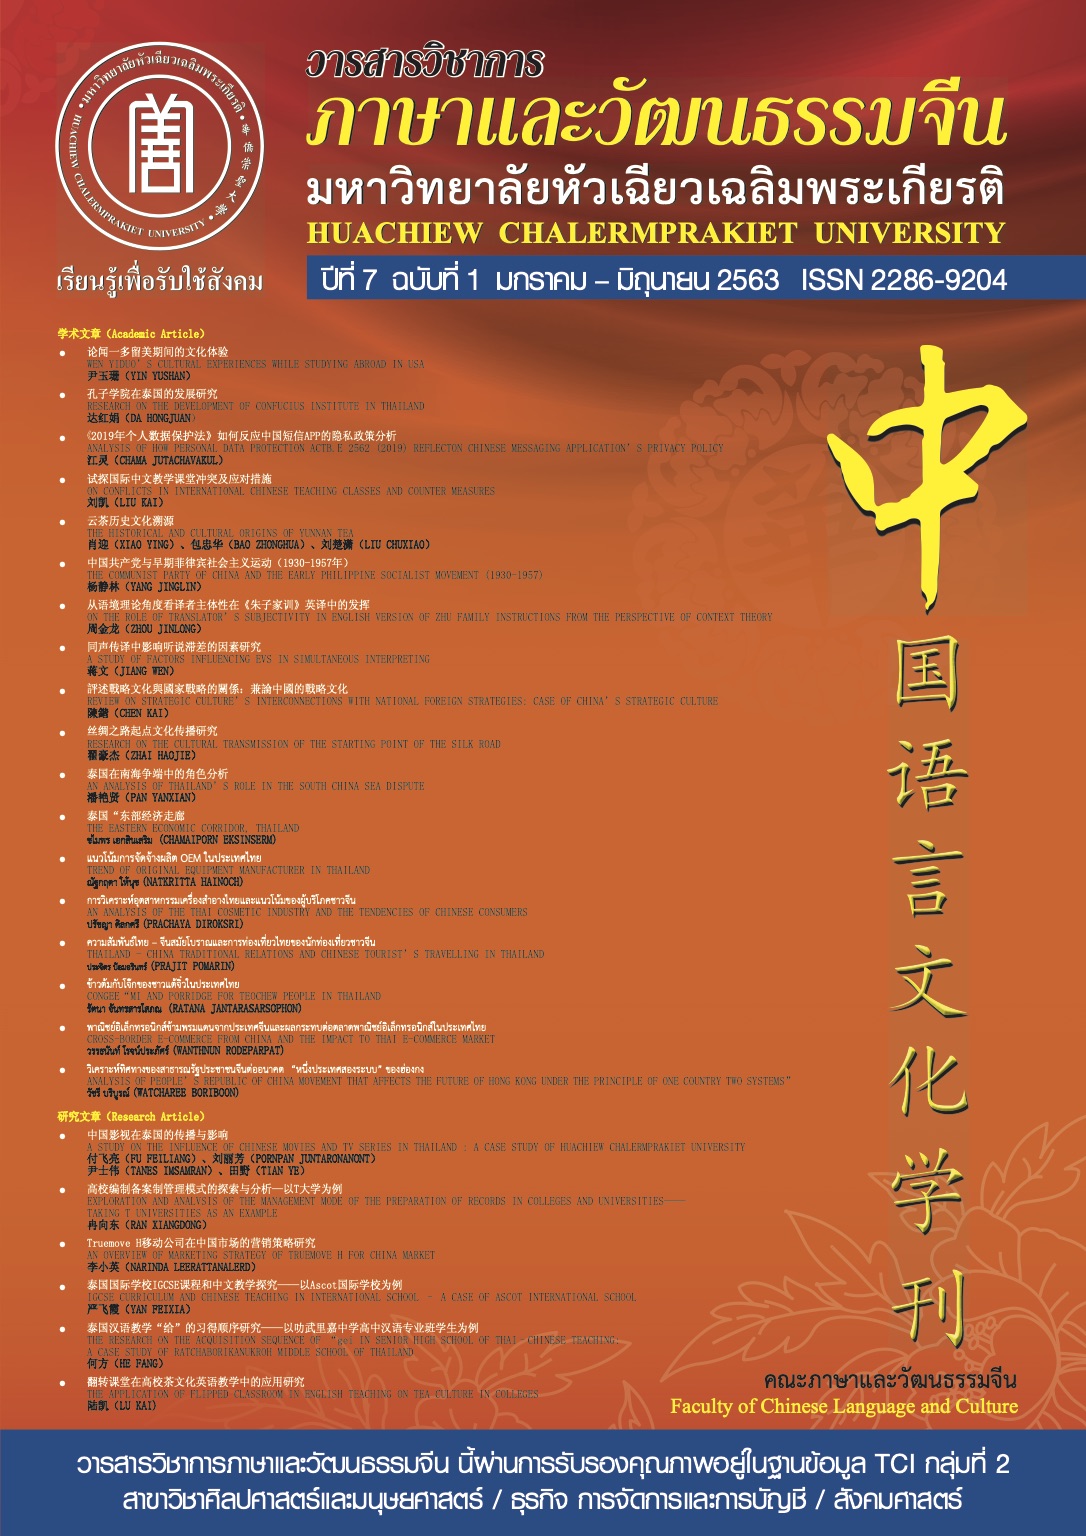 					View Vol. 7 No. 1 (2020): Year 7 Vol.1 Journal of Faculty of Chinese Language and Culture (Jan - Jun 2020)
				